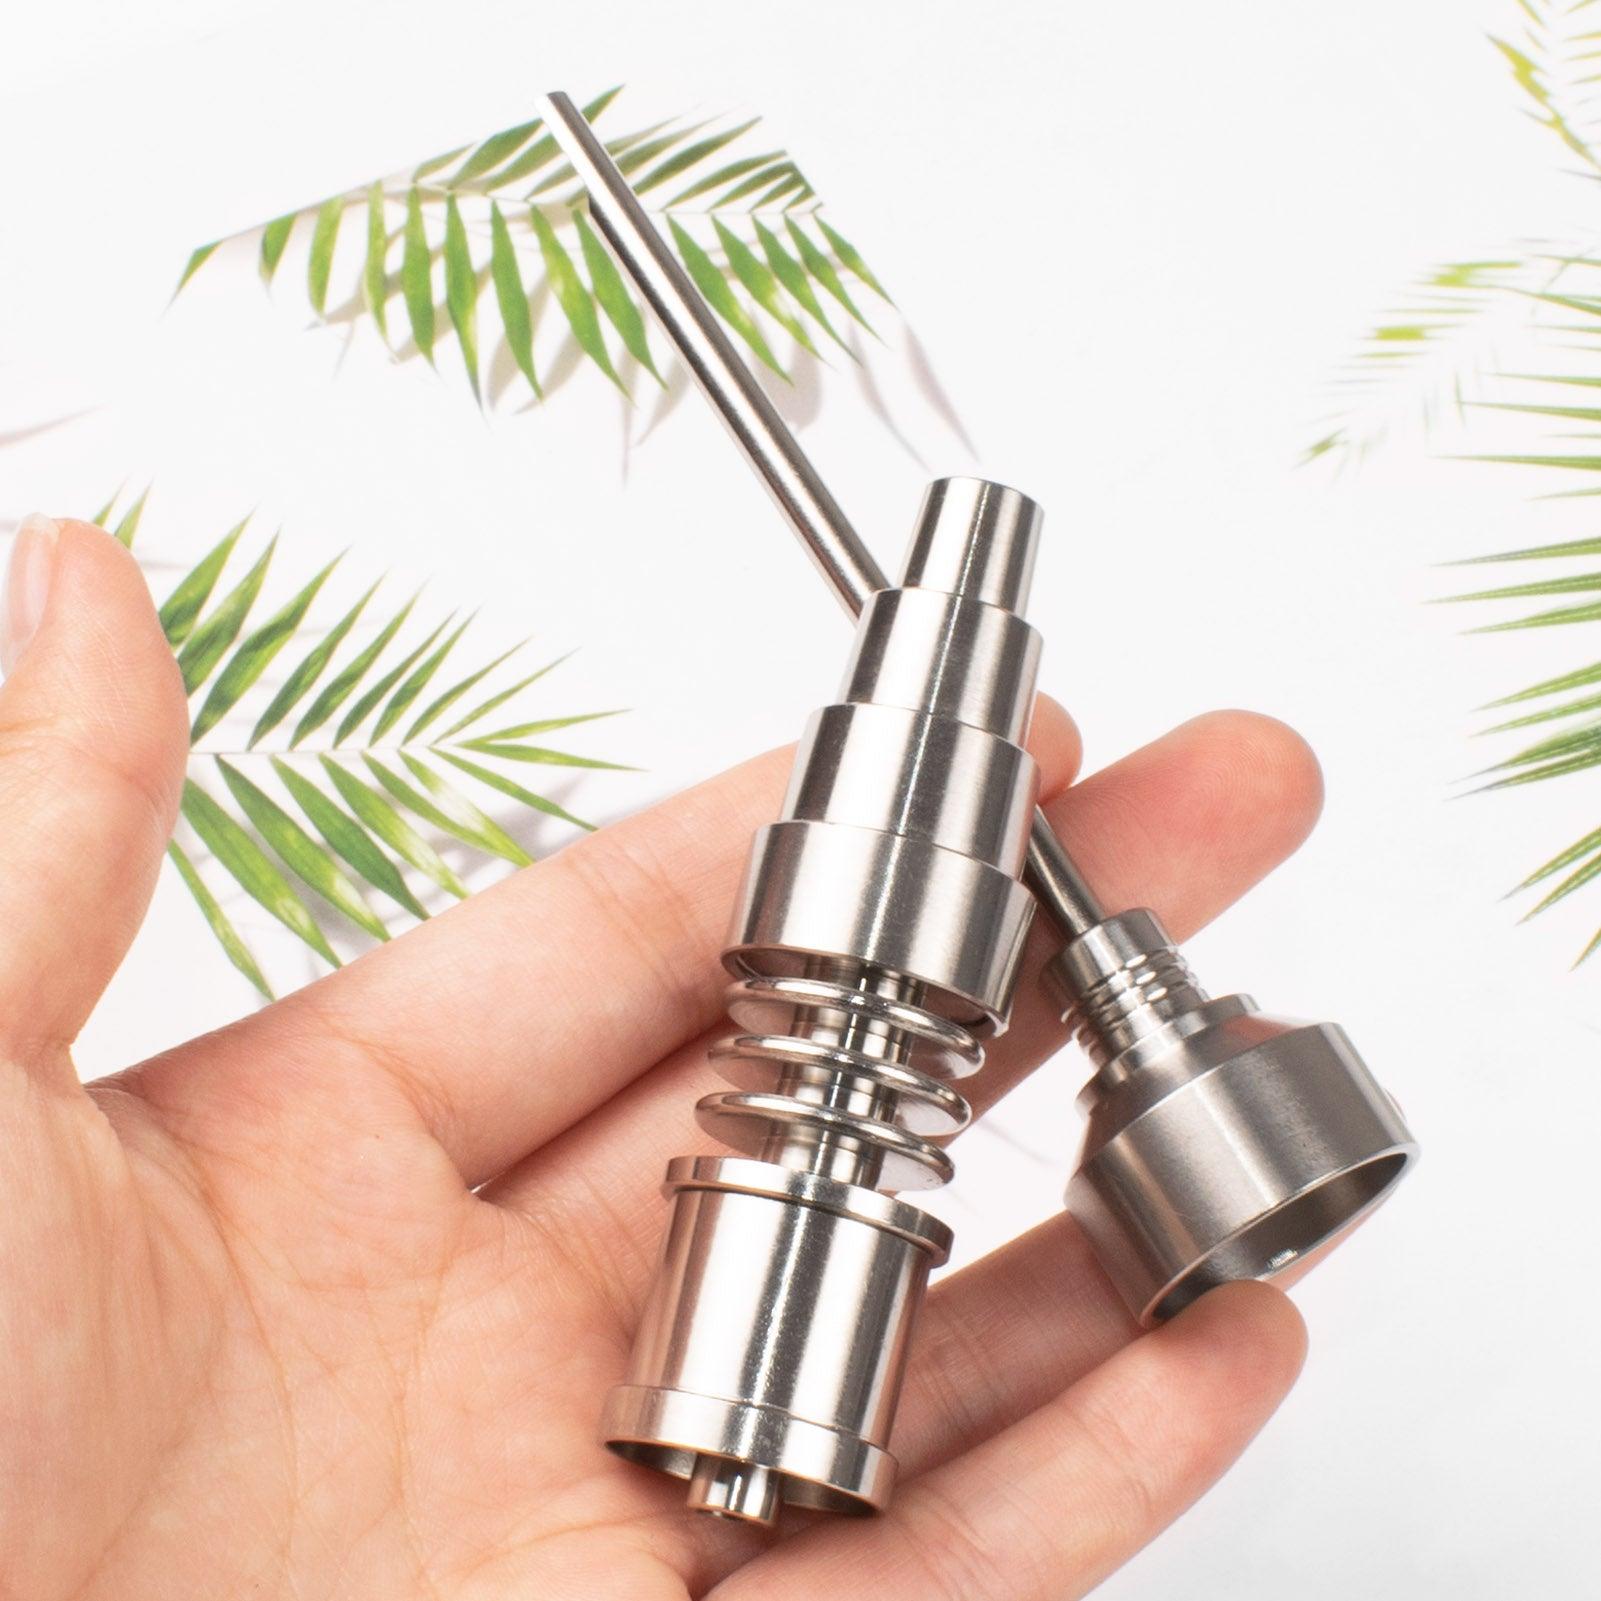 THE 6-in-1 Universal Titanium Nail for E-Nails - iVapebest